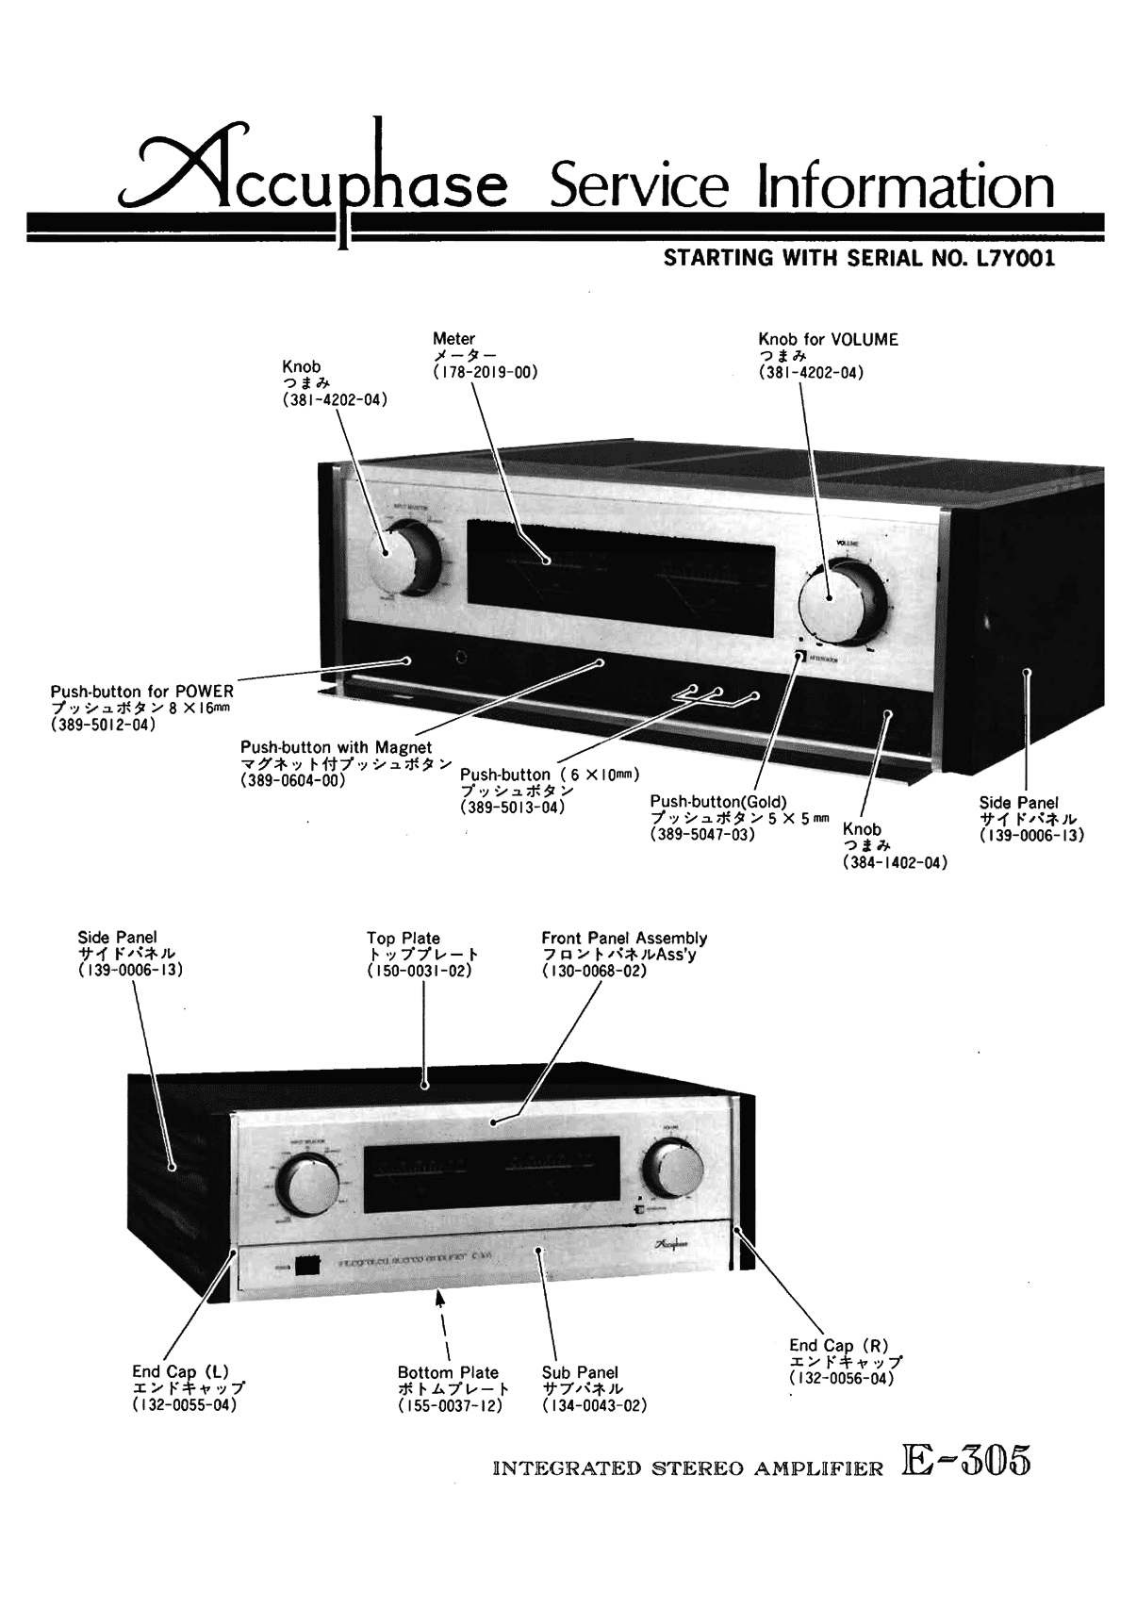 Accuphase E305 Schematic